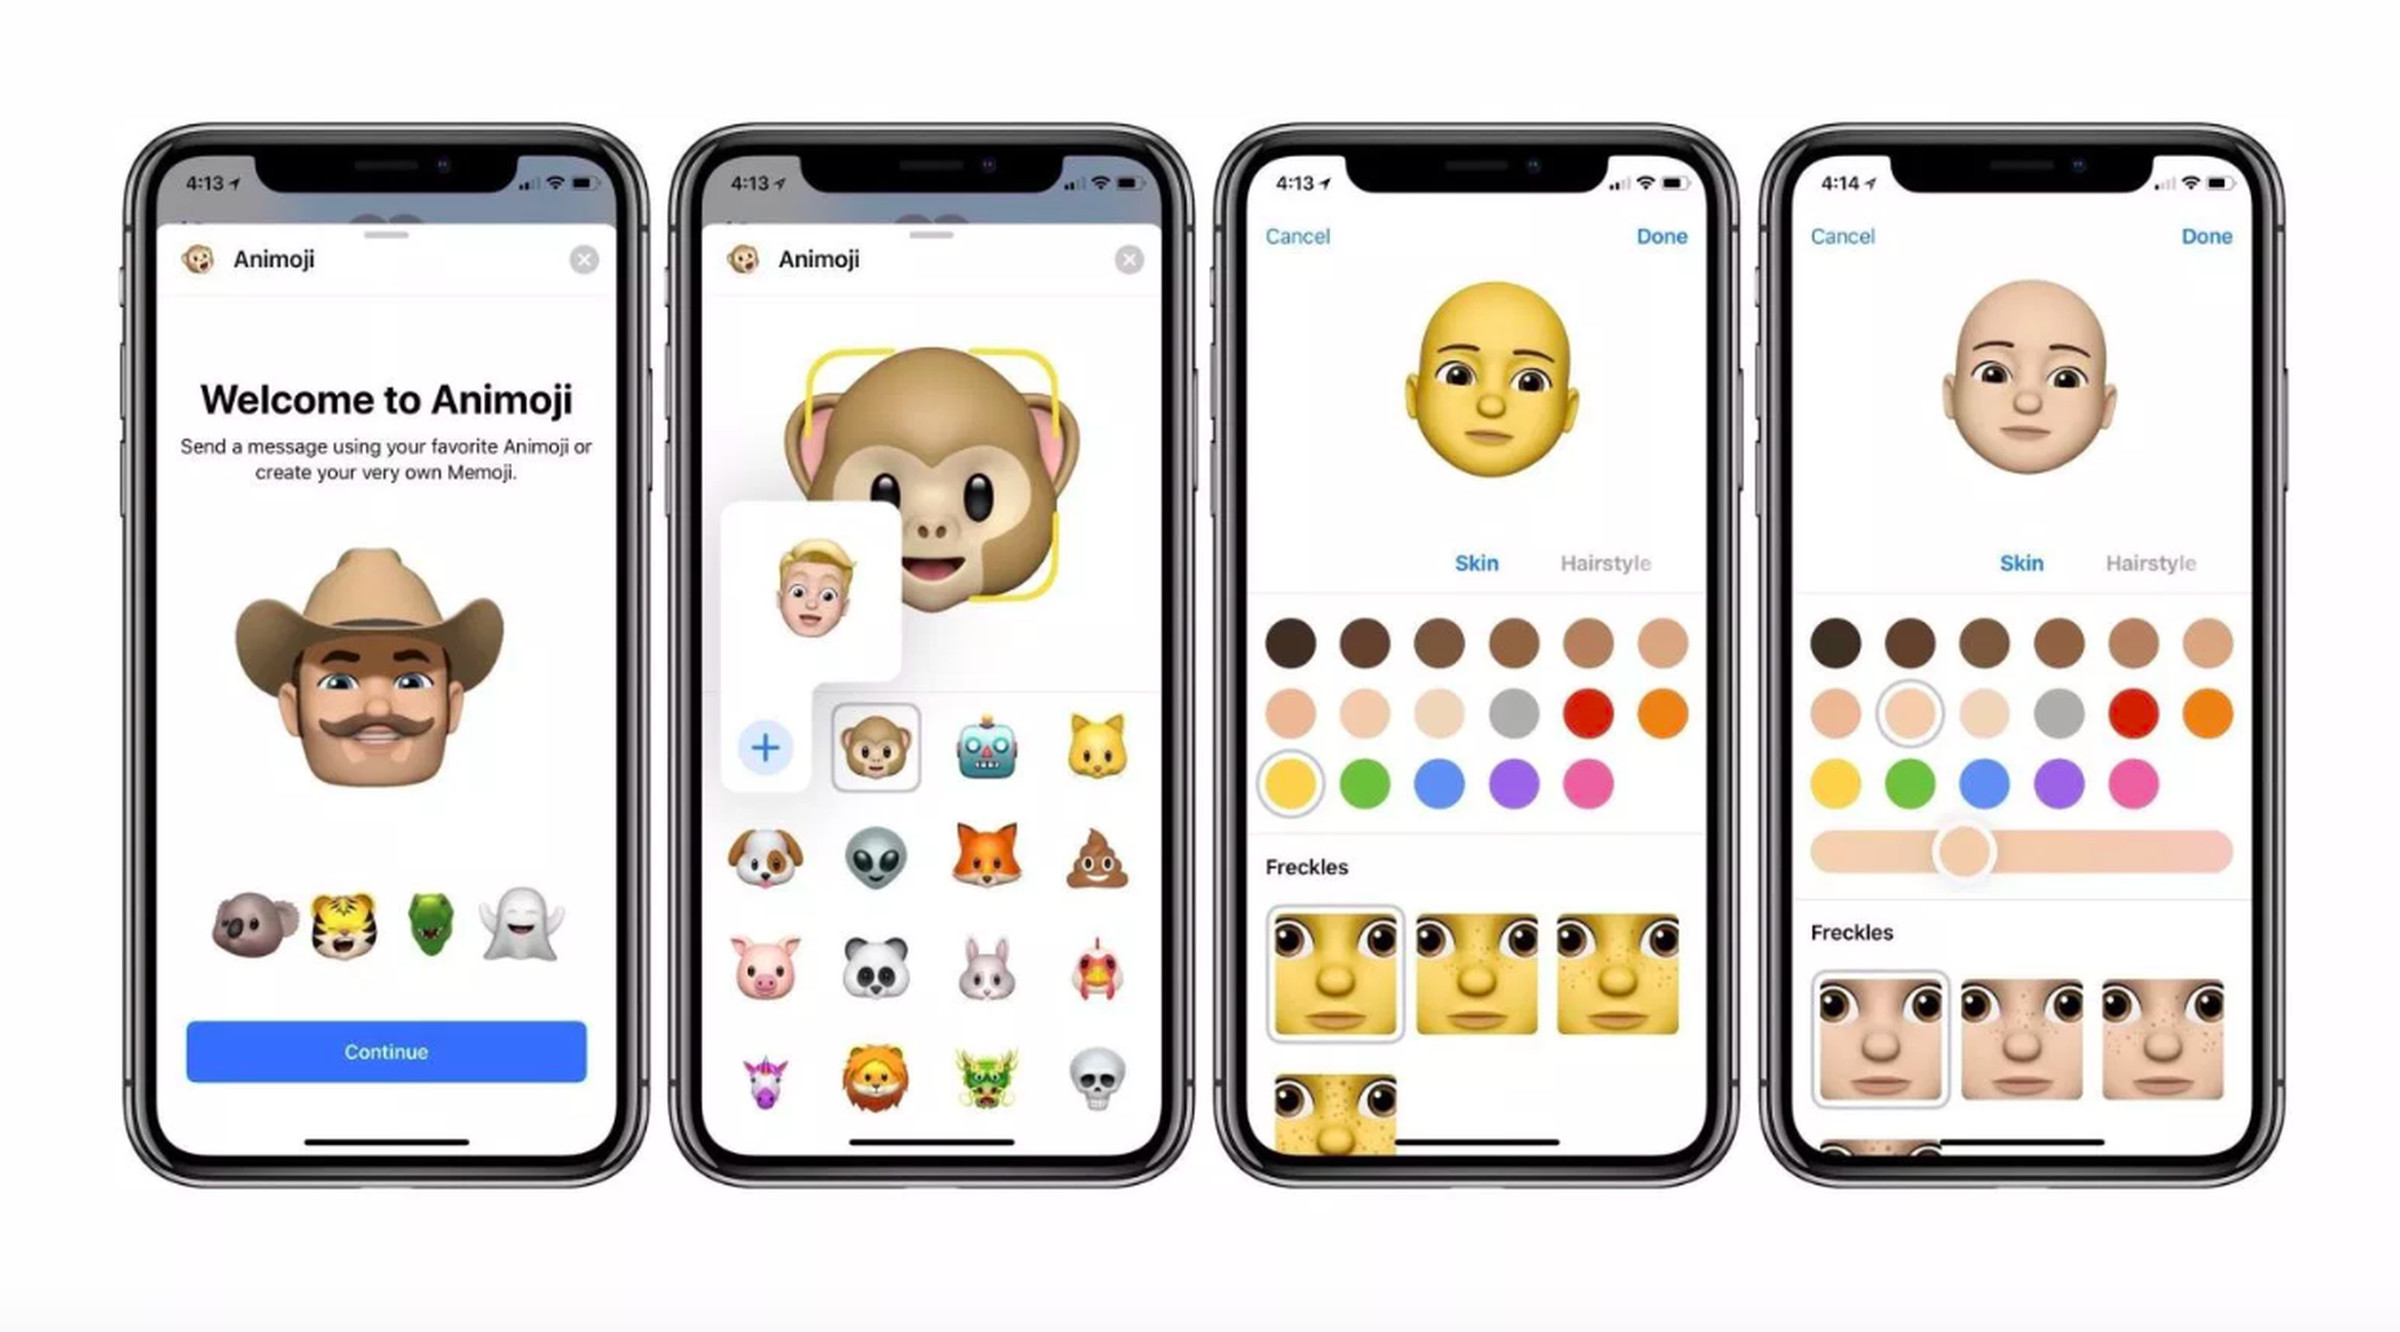 Apple’s Memoji let you create a cartoon avatar that you control with your face.